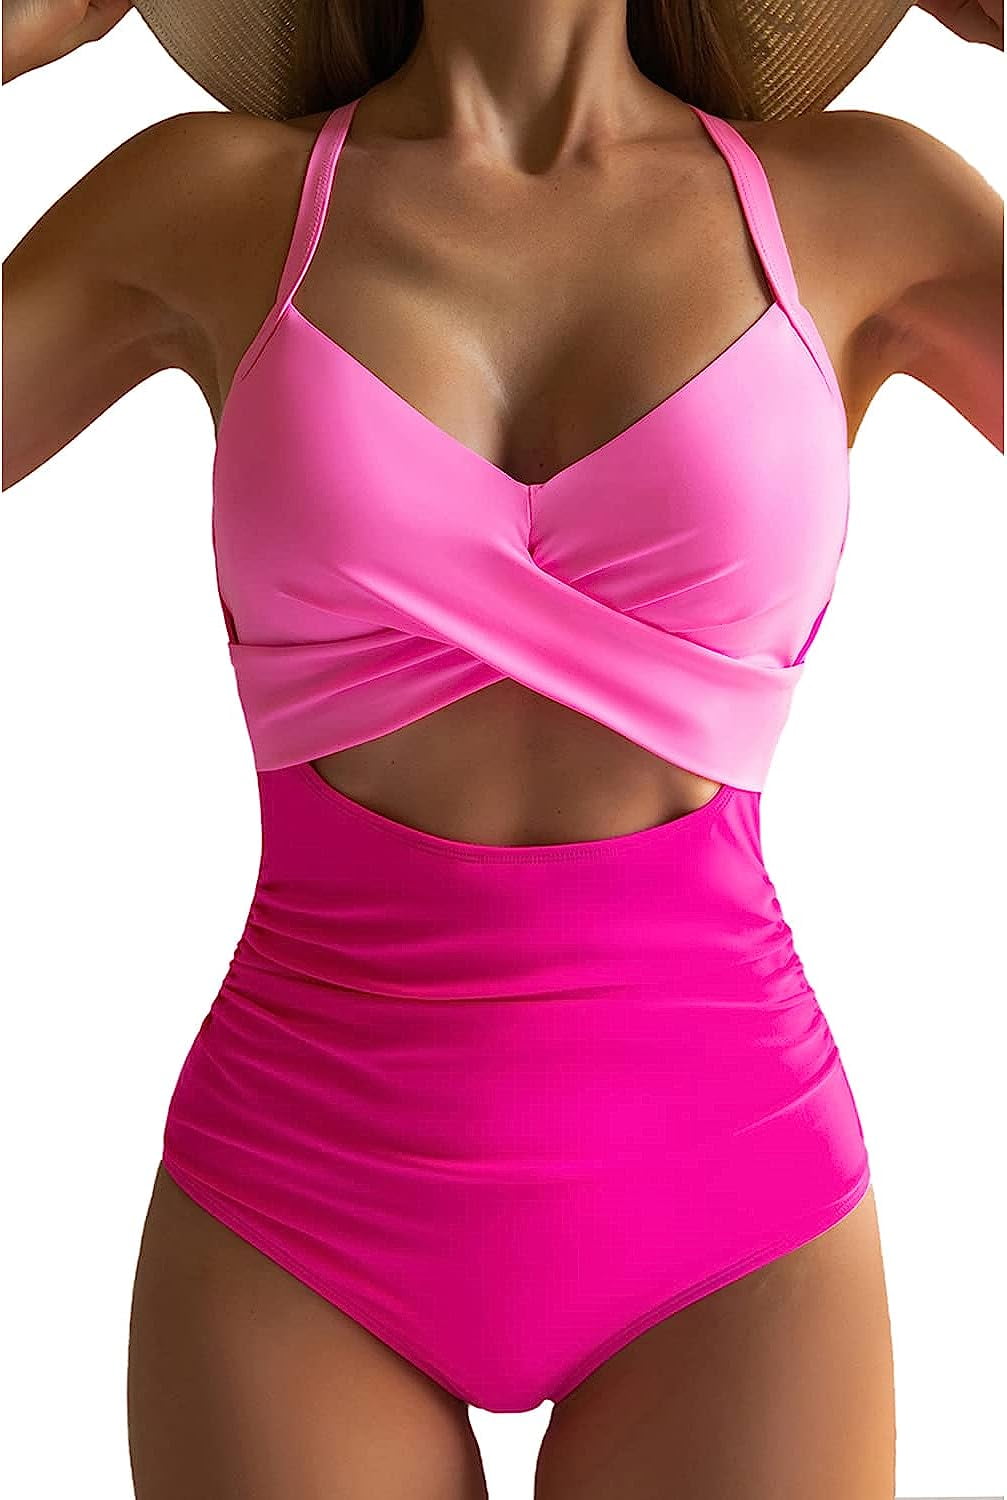 Swim Romper Swimsuits For Women Bathing Suit Tummy Control With Built-in Bra  For Vacations Honeymoons Beach Pool Cruises - AliExpress